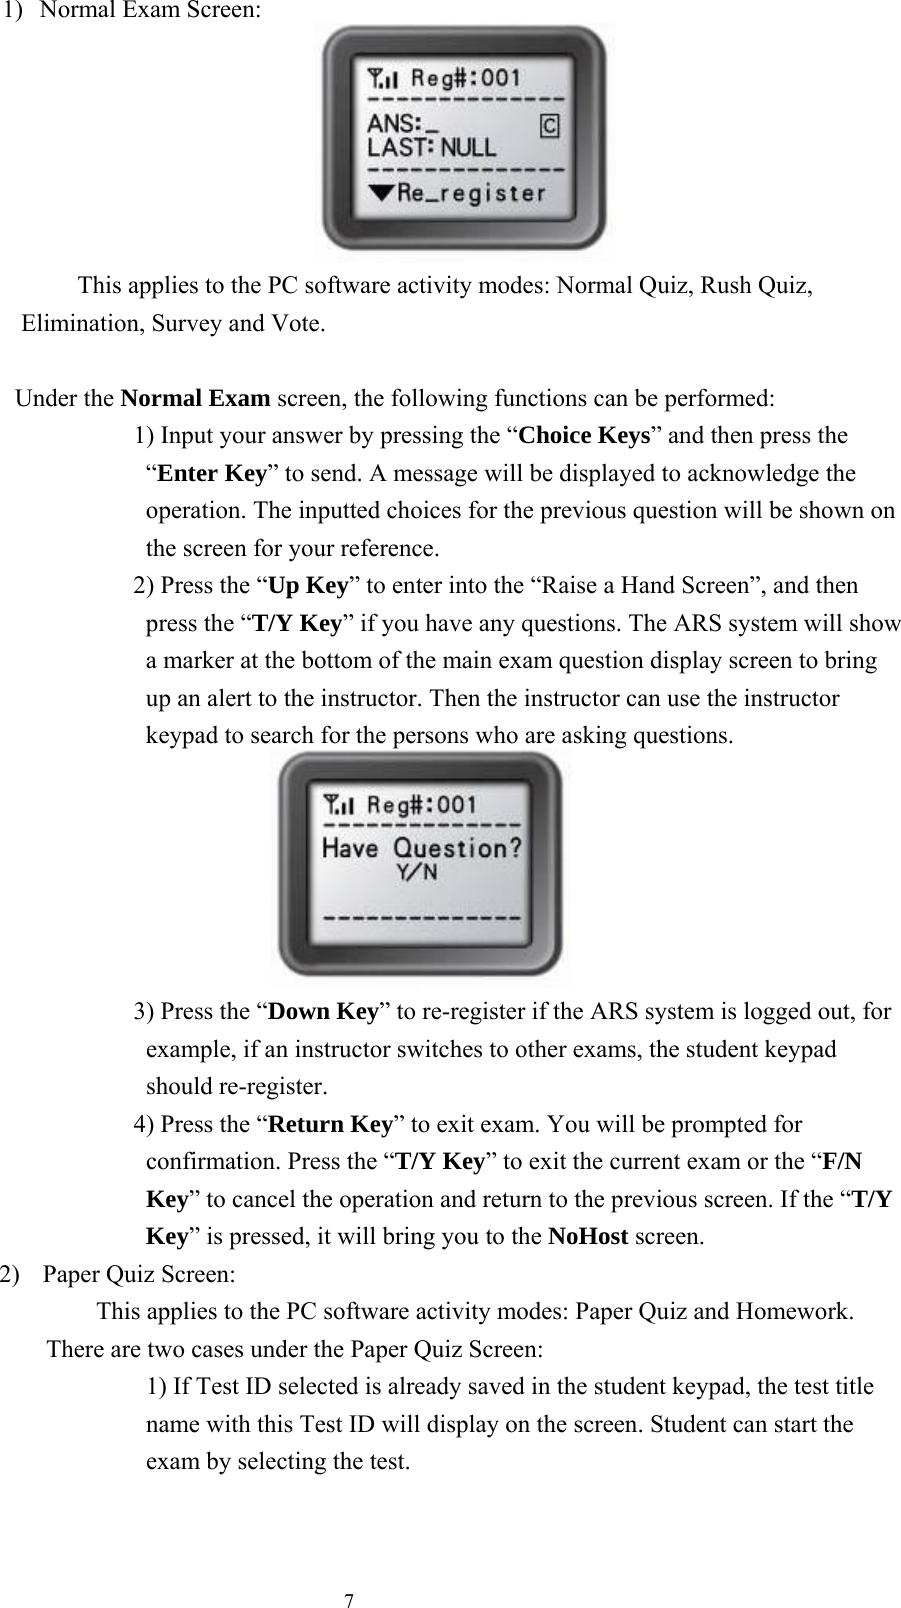  71)  Normal Exam Screen:                          This applies to the PC software activity modes: Normal Quiz, Rush Quiz, Elimination, Survey and Vote.  Under the Normal Exam screen, the following functions can be performed:       1) Input your answer by pressing the “Choice Keys” and then press the “Enter Key” to send. A message will be displayed to acknowledge the operation. The inputted choices for the previous question will be shown on the screen for your reference.      2) Press the “Up Key” to enter into the “Raise a Hand Screen”, and then press the “T/Y Key” if you have any questions. The ARS system will show a marker at the bottom of the main exam question display screen to bring up an alert to the instructor. Then the instructor can use the instructor keypad to search for the persons who are asking questions.                  3) Press the “Down Key” to re-register if the ARS system is logged out, for example, if an instructor switches to other exams, the student keypad should re-register.    4) Press the “Return Key” to exit exam. You will be prompted for confirmation. Press the “T/Y Key” to exit the current exam or the “F/N Key” to cancel the operation and return to the previous screen. If the “T/Y Key” is pressed, it will bring you to the NoHost screen. 2)  Paper Quiz Screen:     This applies to the PC software activity modes: Paper Quiz and Homework.   There are two cases under the Paper Quiz Screen:         1) If Test ID selected is already saved in the student keypad, the test title name with this Test ID will display on the screen. Student can start the exam by selecting the test. 